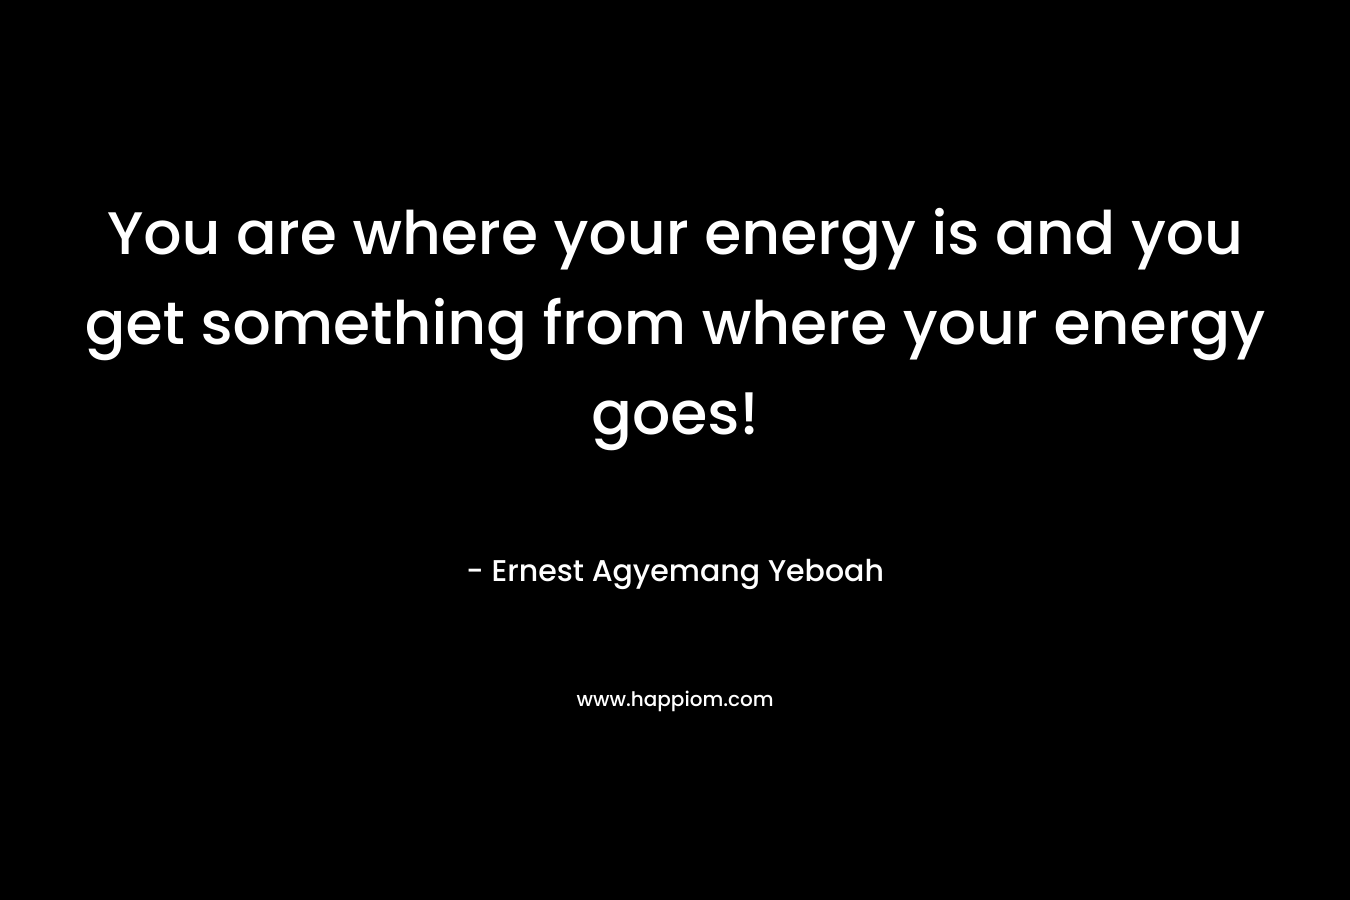 You are where your energy is and you get something from where your energy goes!